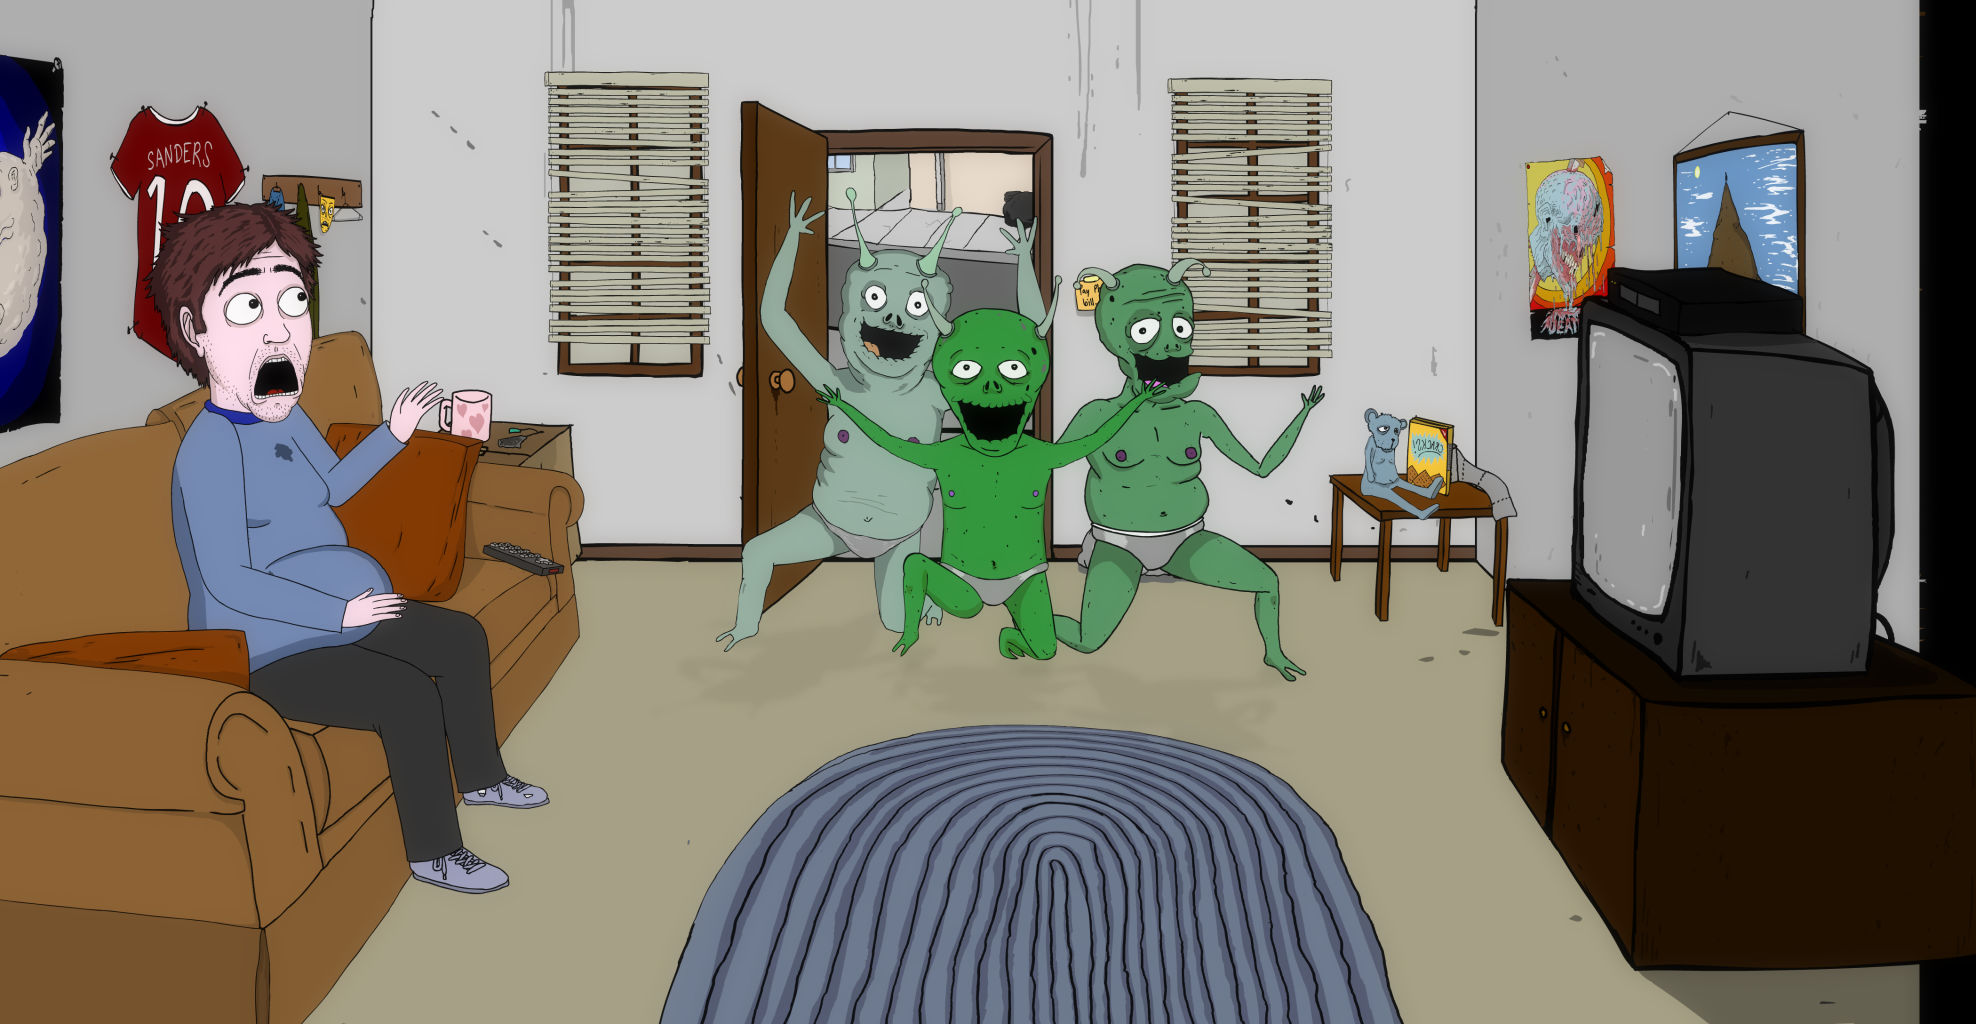 Comedy Central orders animated series, “Jeff and Some Aliens”